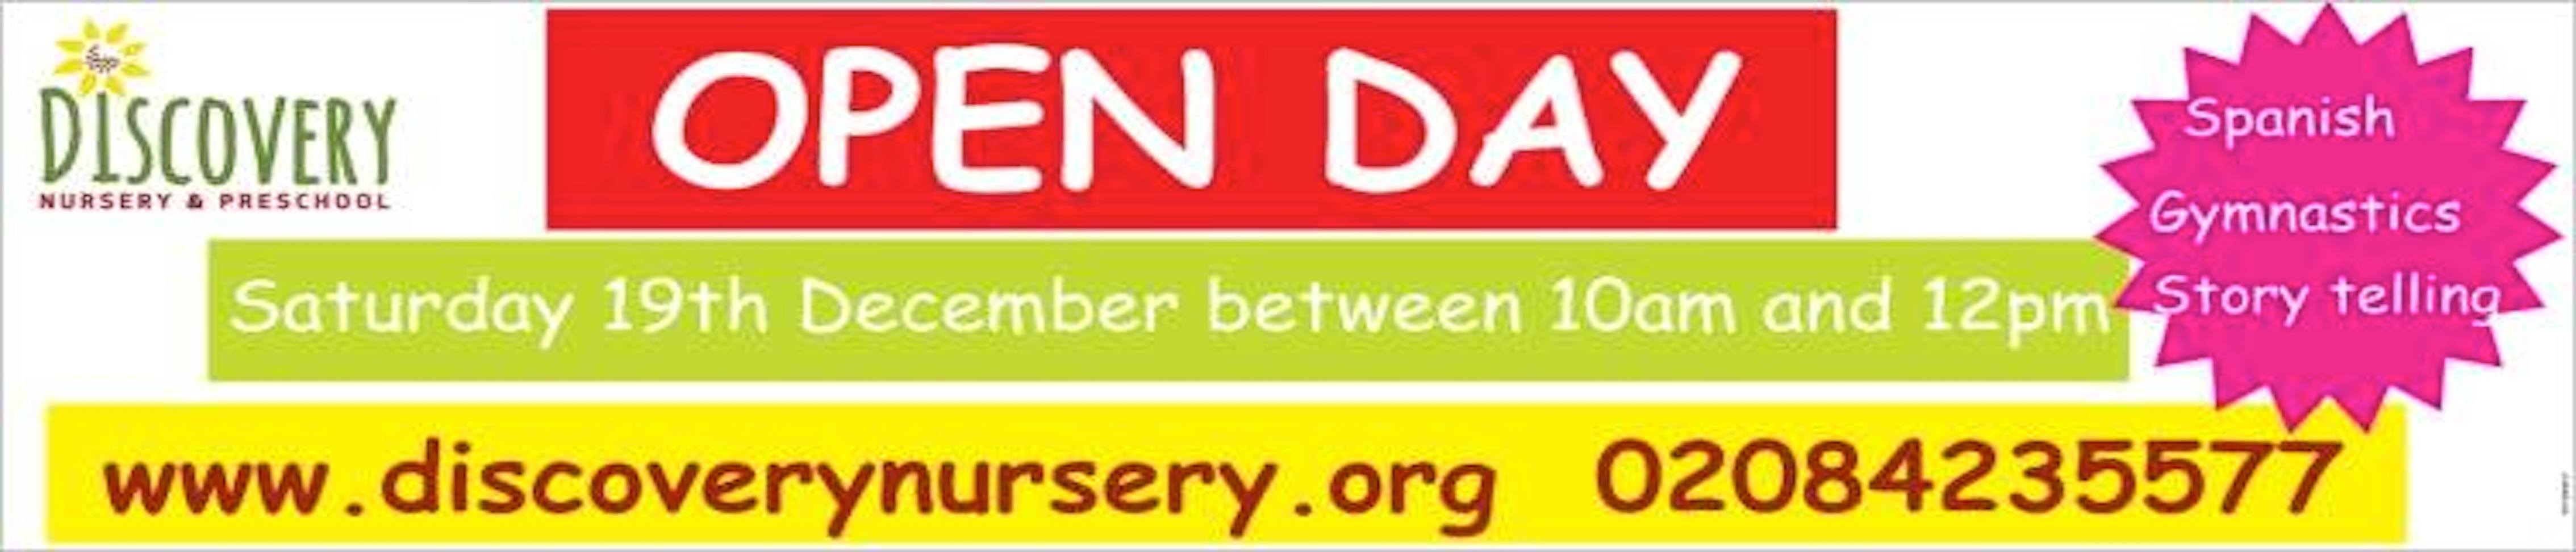 Open Day – Saturday 19th December, 10am-12pm